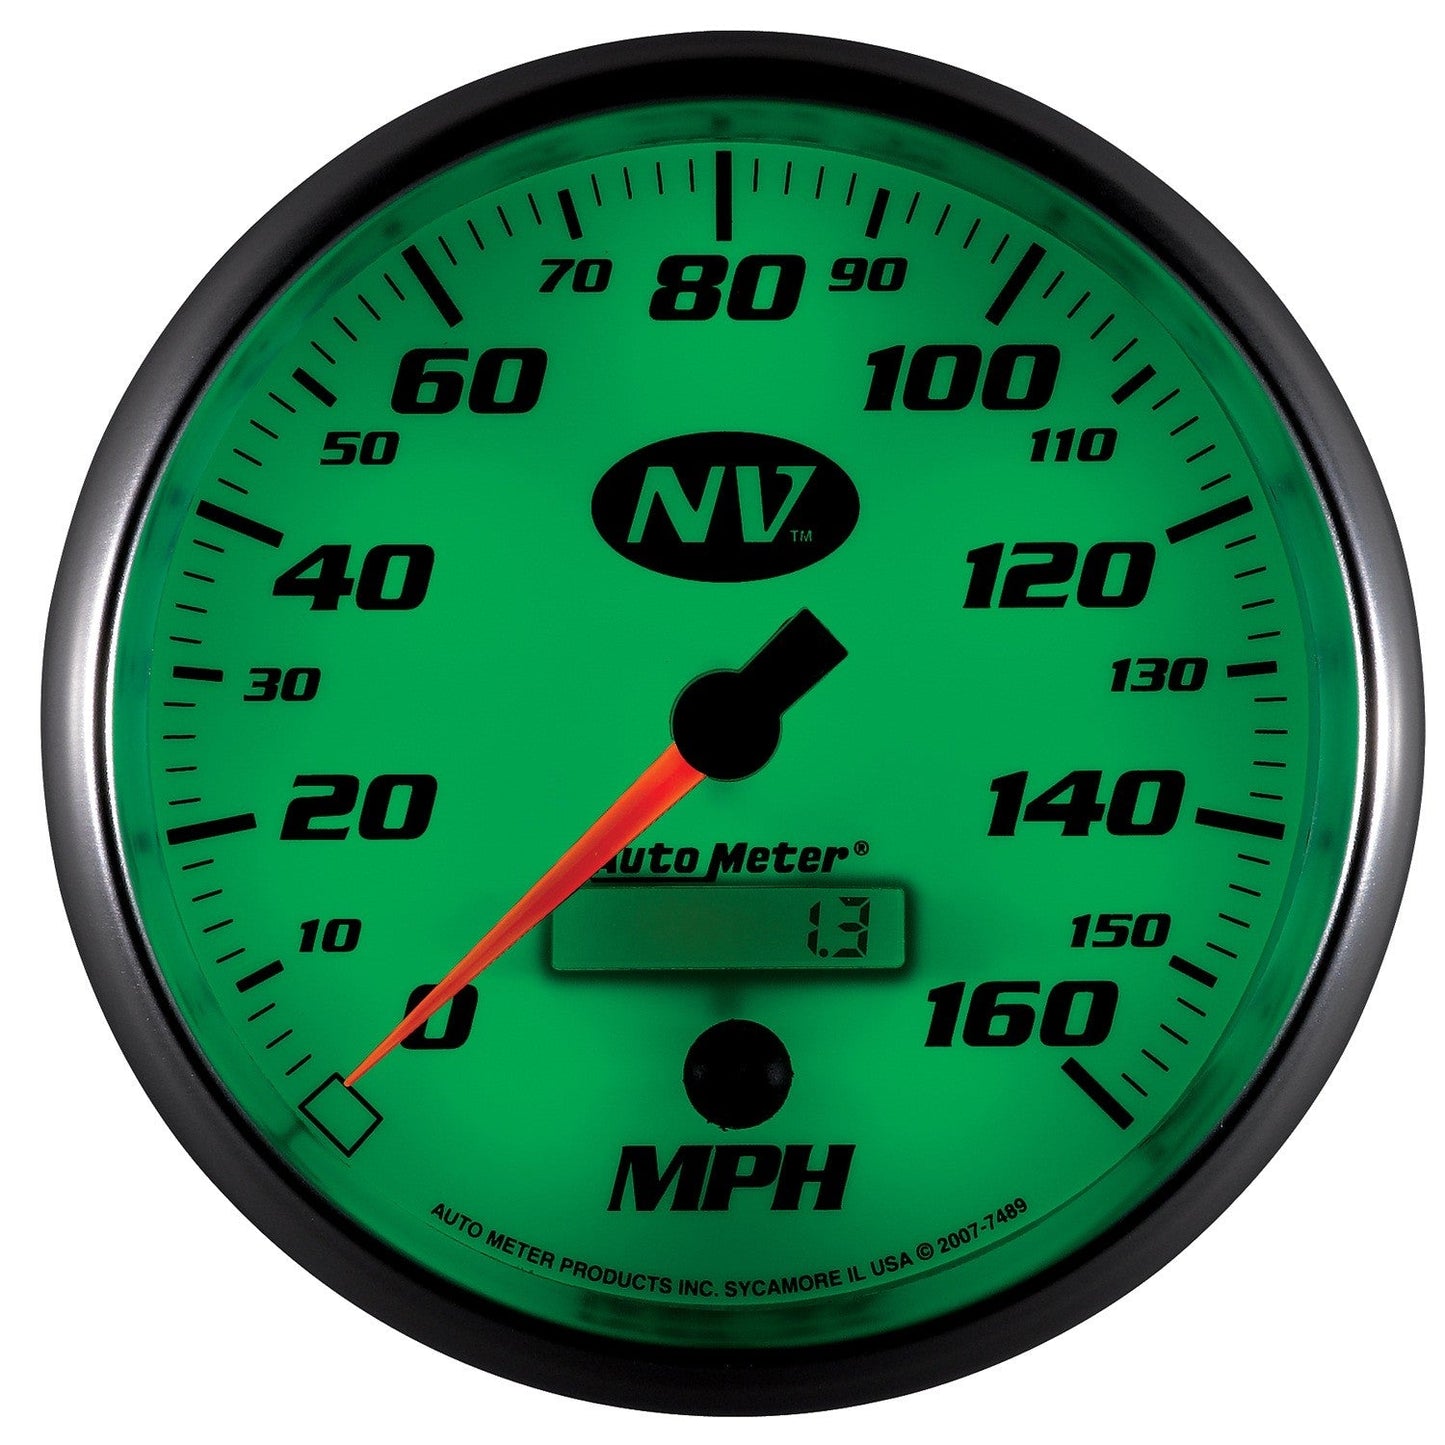 AutoMeter - 5" SPEEDOMETER, 0-160 MPH, ELECTRIC, NV (7489)